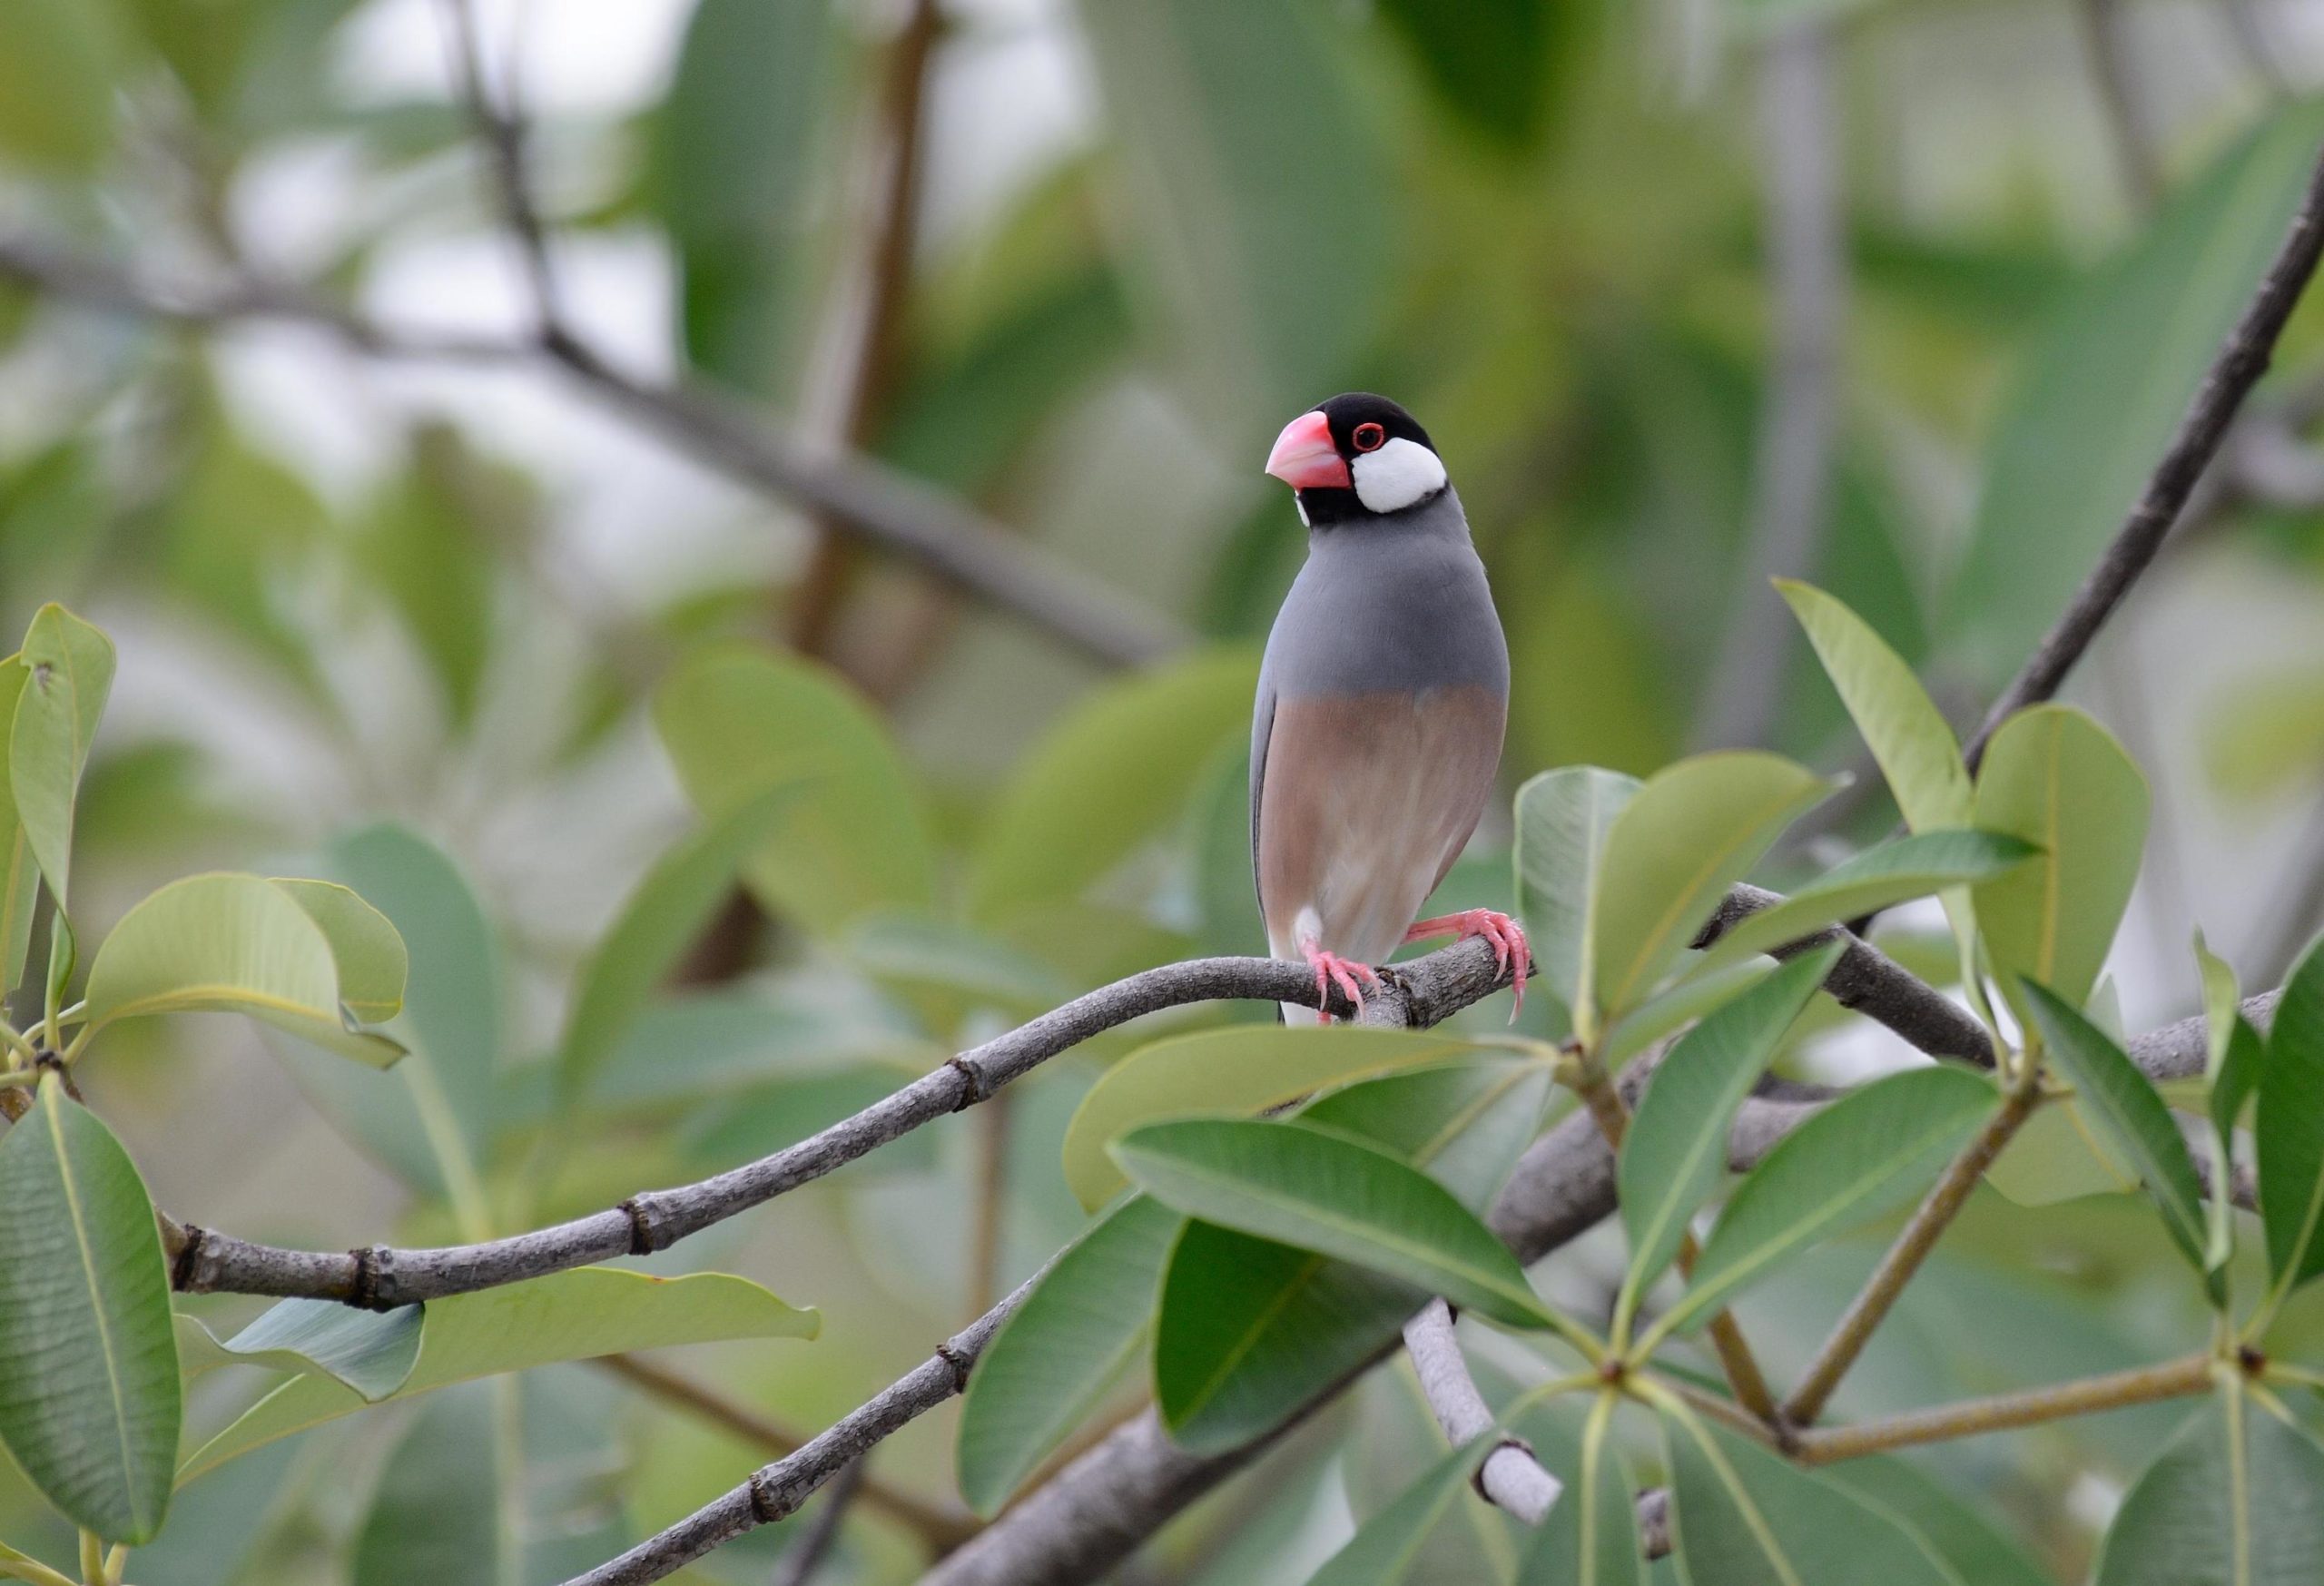 Java Sparrow is listed as endangered by the IUCN. Native to the Indonesian island of Java, small populations can be found elsewhere in the Asia-Pacific region, including on Mindanao